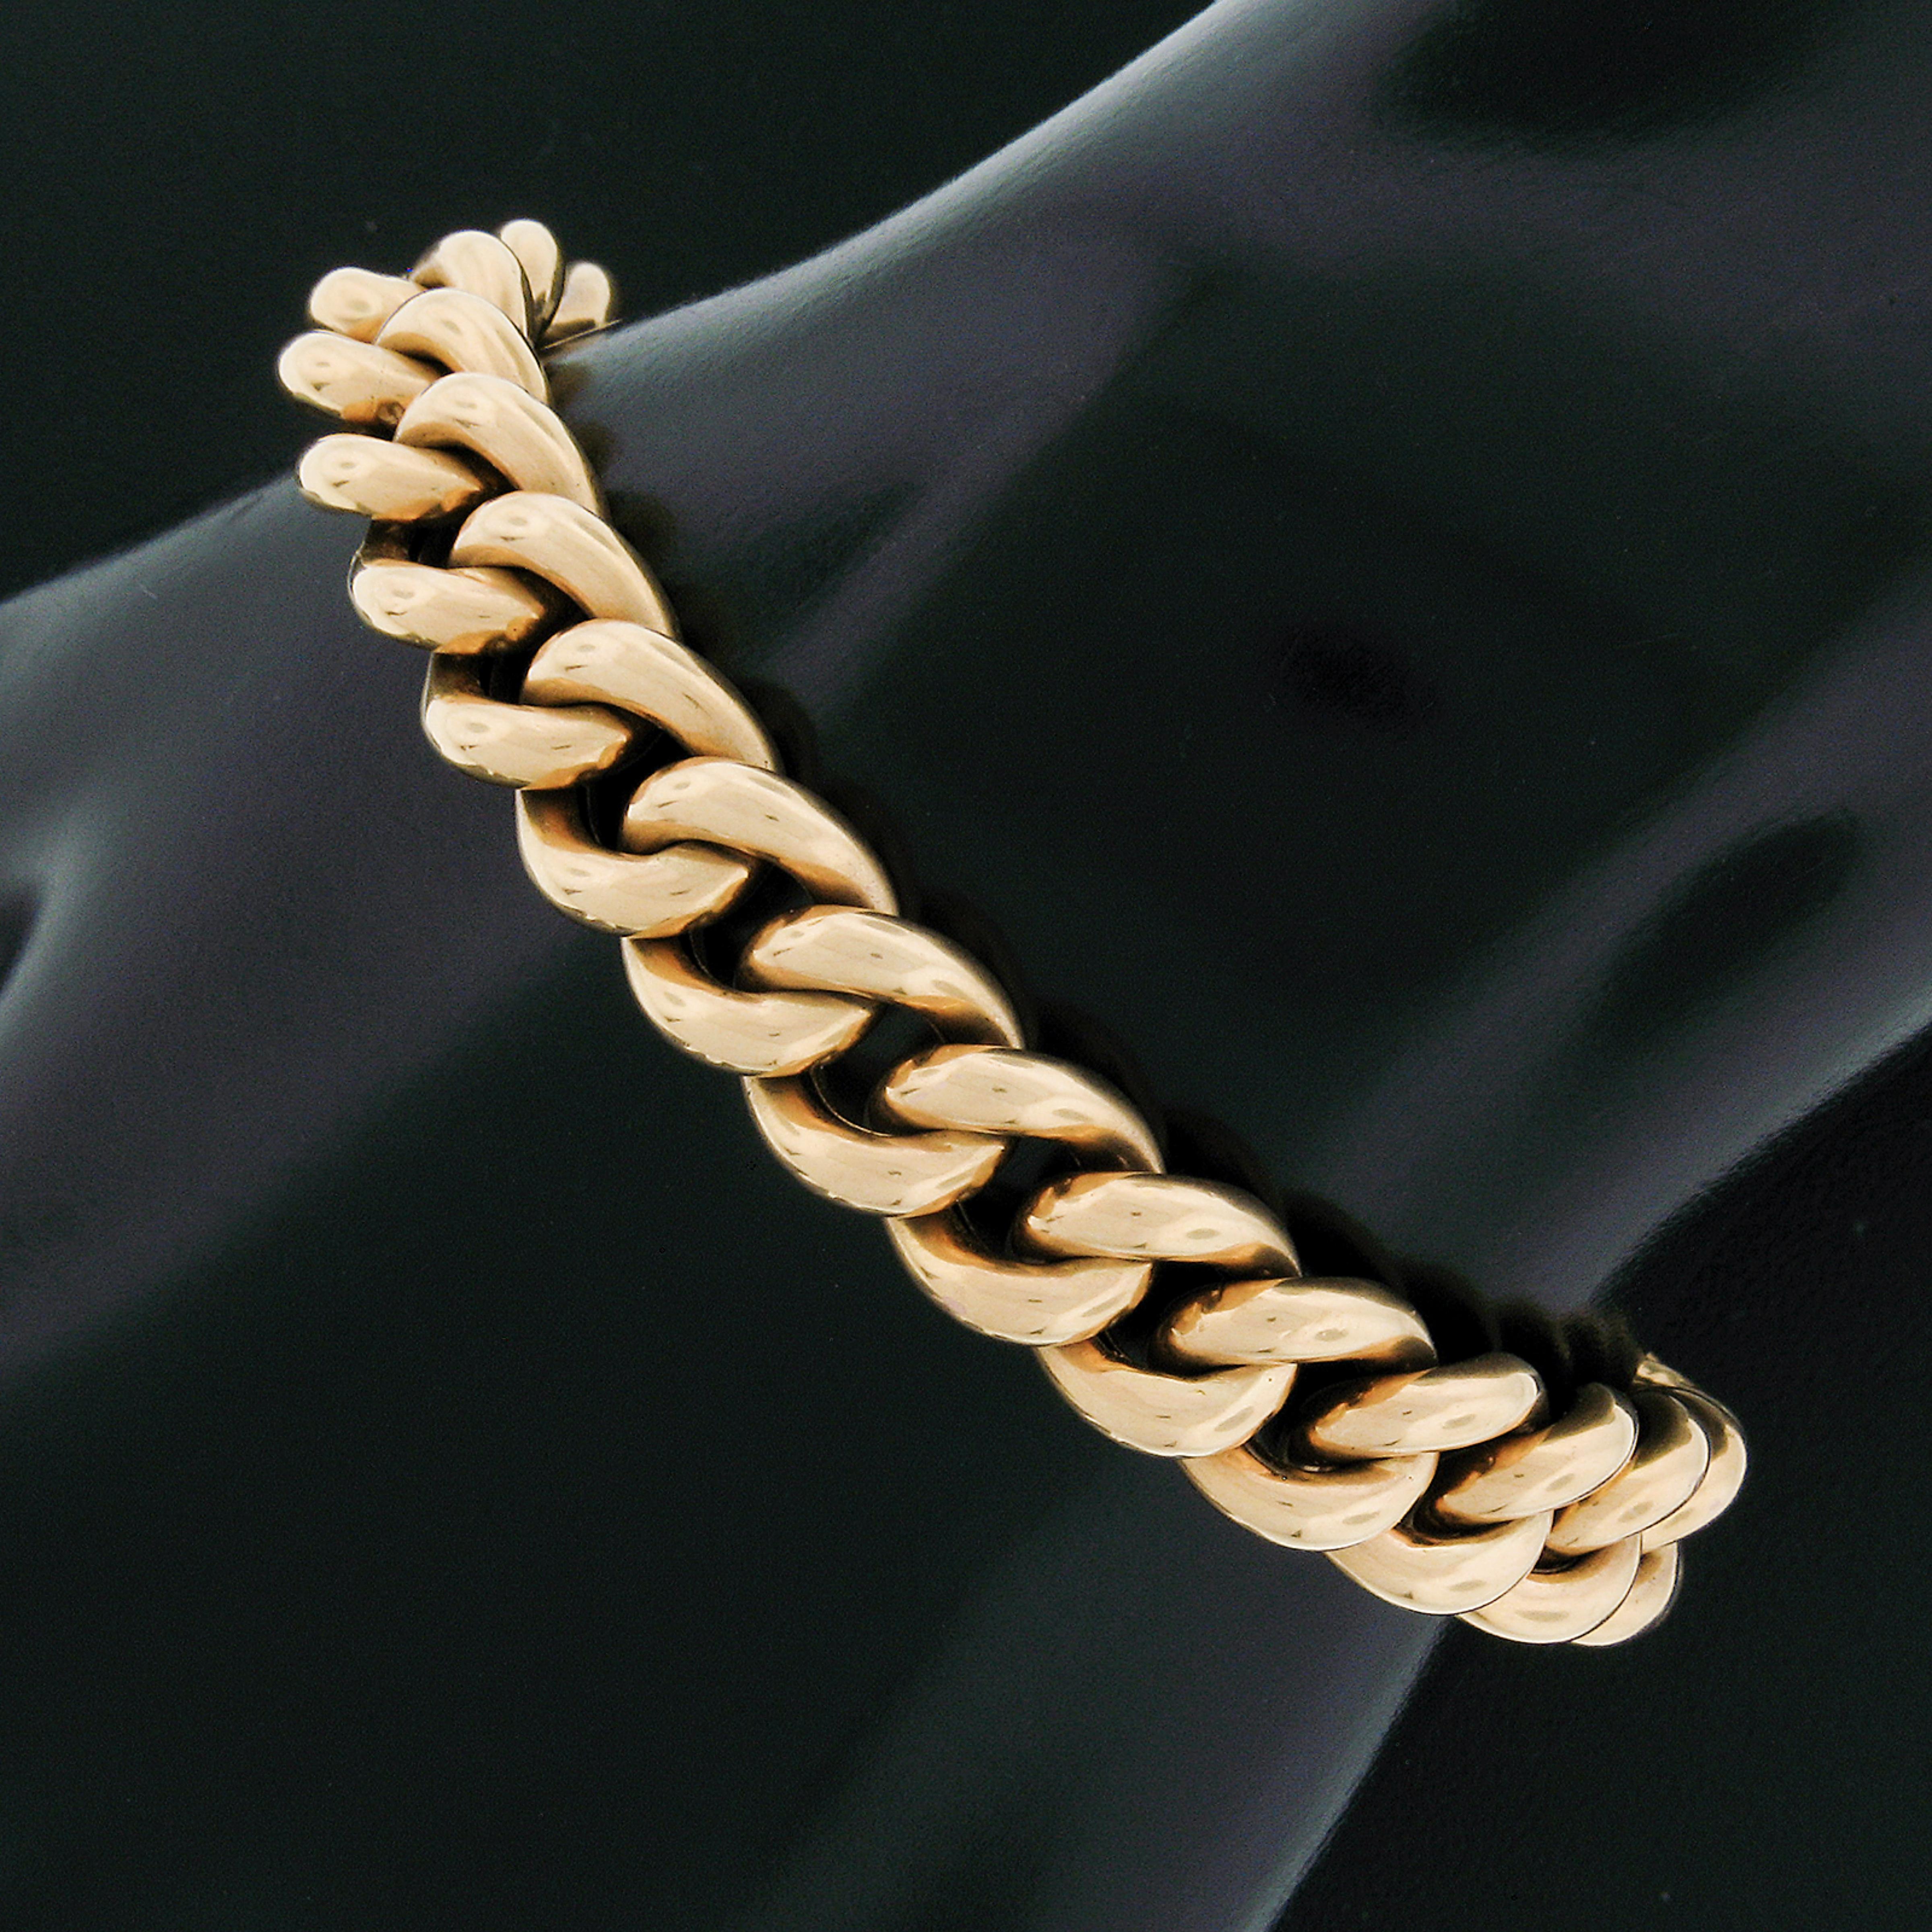 Here we have a beautiful antique chain bracelet that was crafted during the Victorian era from solid 18k gold. This 9.5mm curb link style bracelet has a nice polished finish throughout with a truly bold look on the wrist, yet wears very comfortably